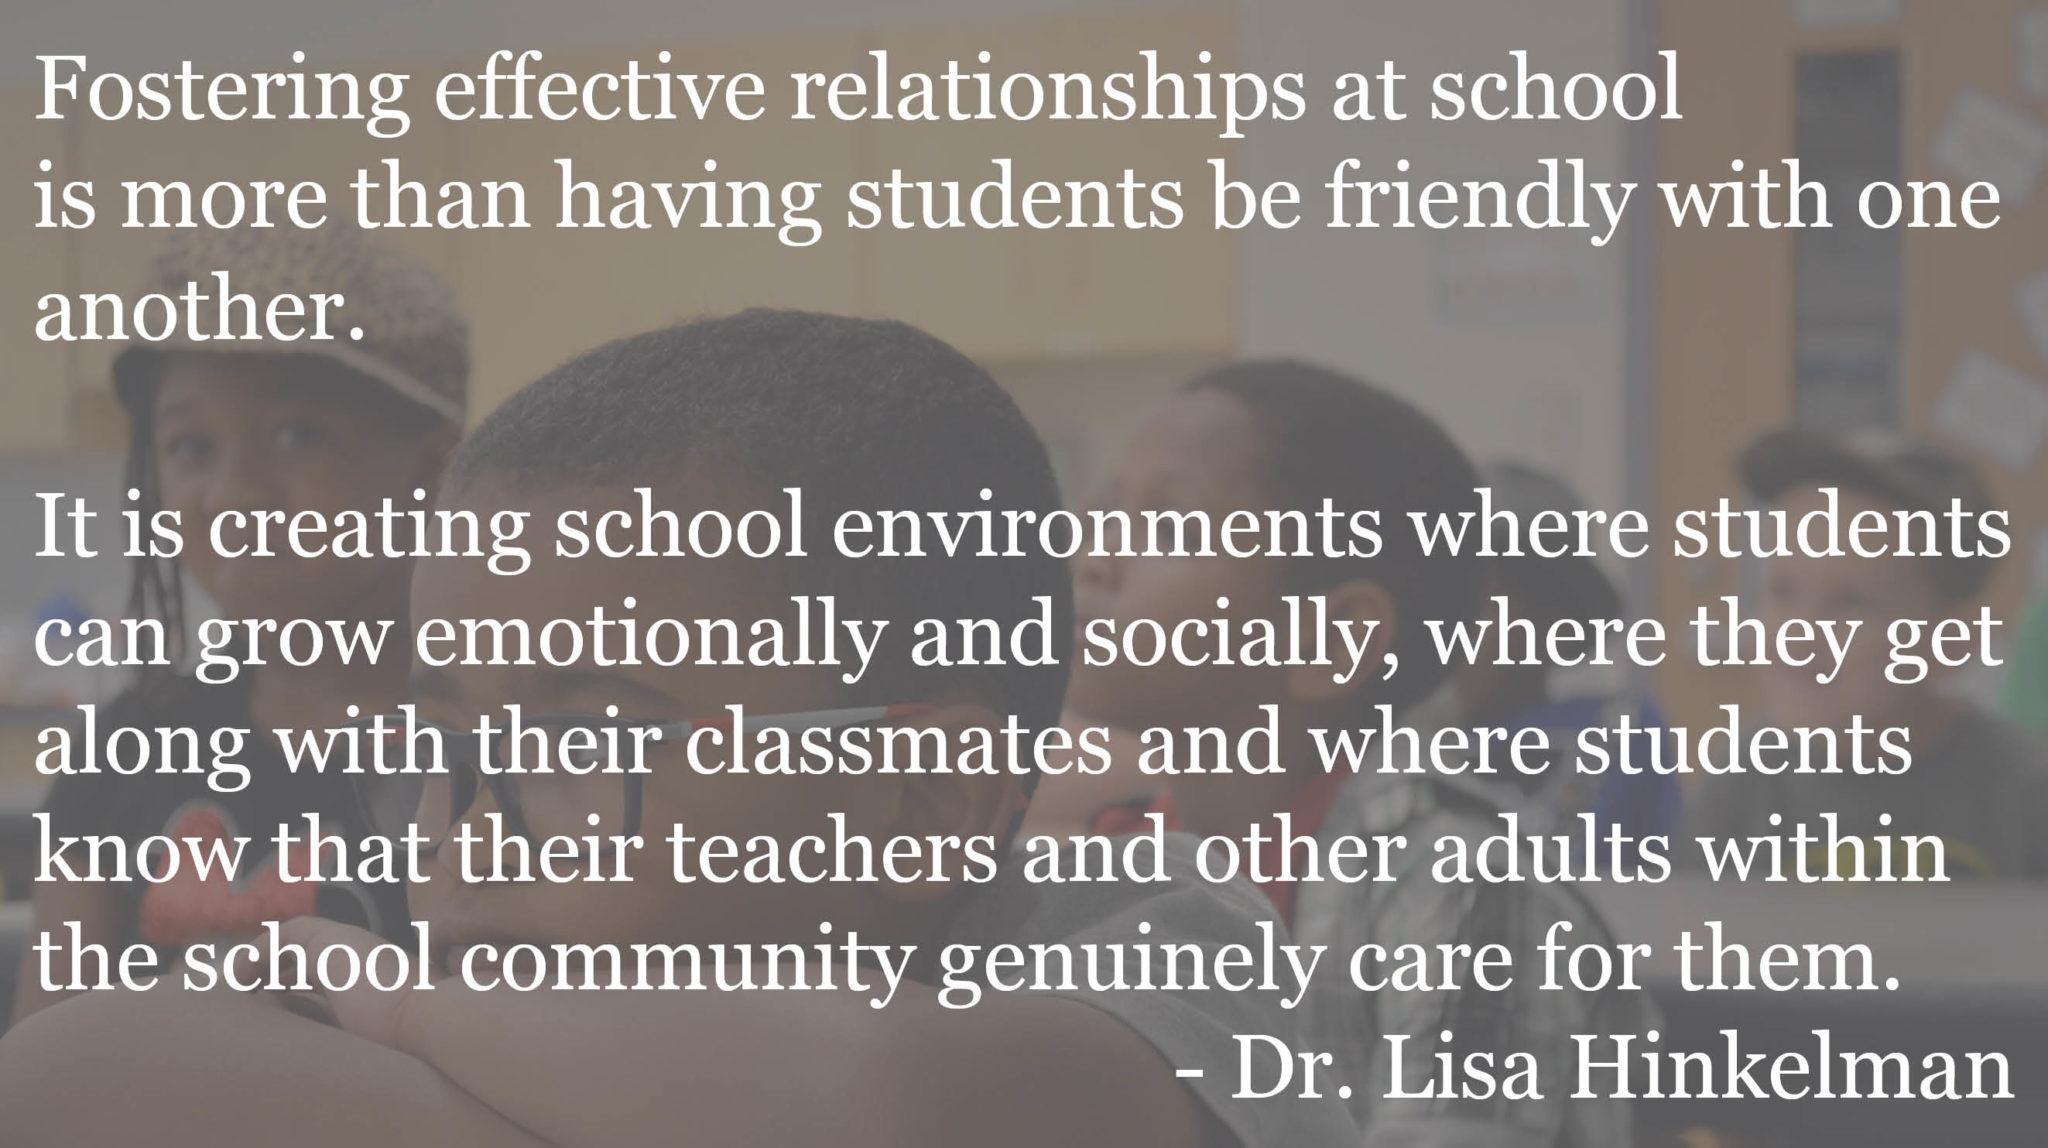 Fostering effective relationships at school is more than having students be friendly with one another. It is creating school environments where students can grow emotionally and socially, where they get along with their classmates and where students know that their teachers and other adults within the school community genuinely care for them. When these things happen, students are likely to perform better behaviorally and academically.